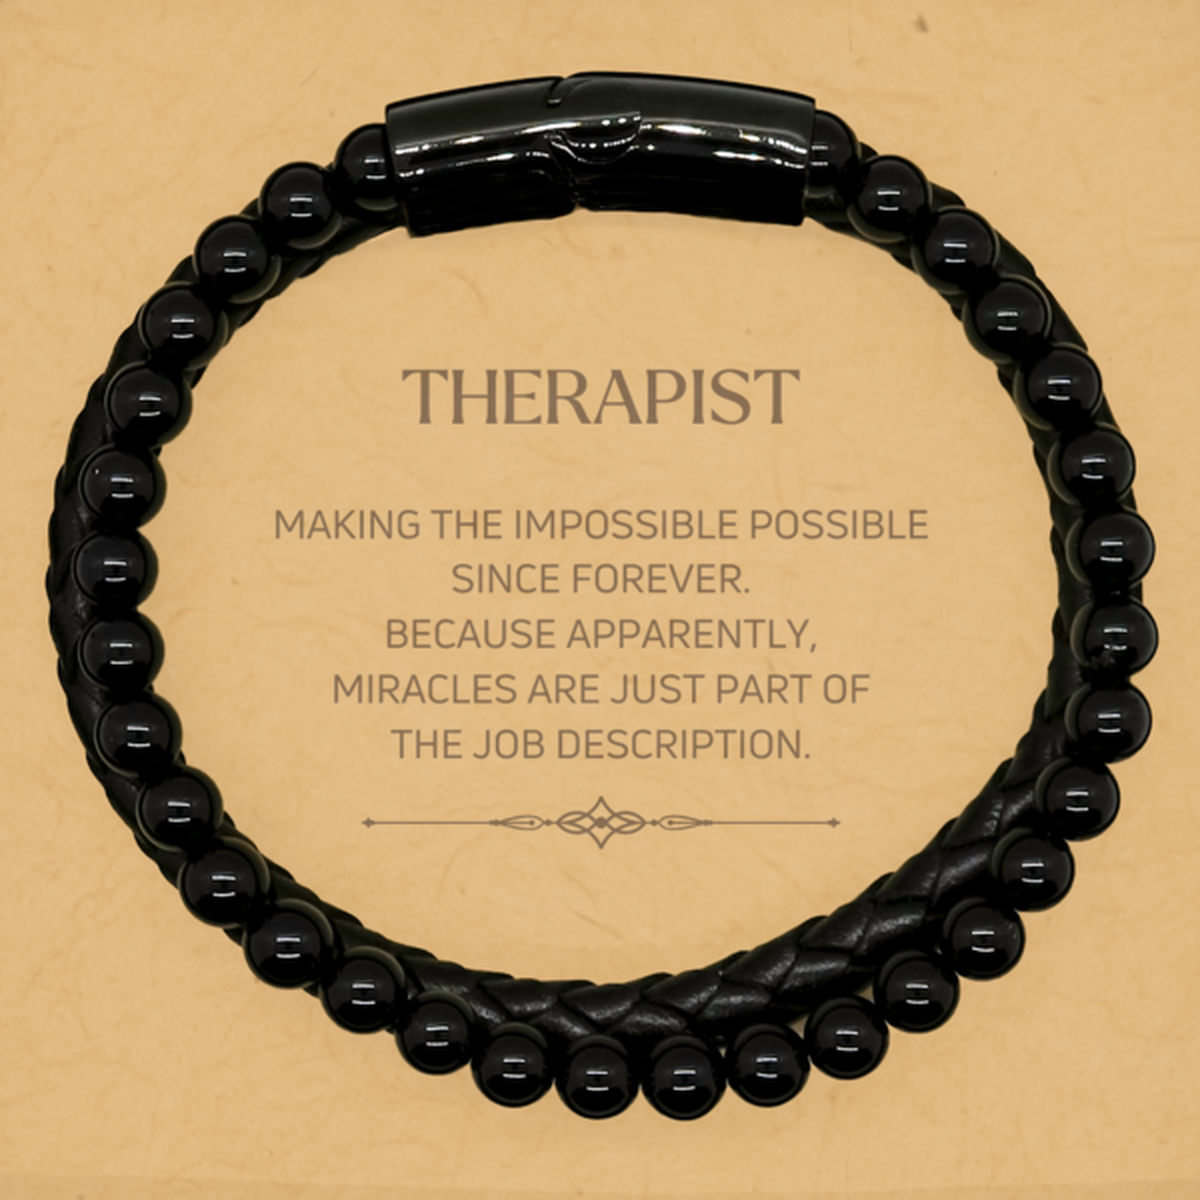 Funny Therapist Gifts, Miracles are just part of the job description, Inspirational Birthday Stone Leather Bracelets For Therapist, Men, Women, Coworkers, Friends, Boss